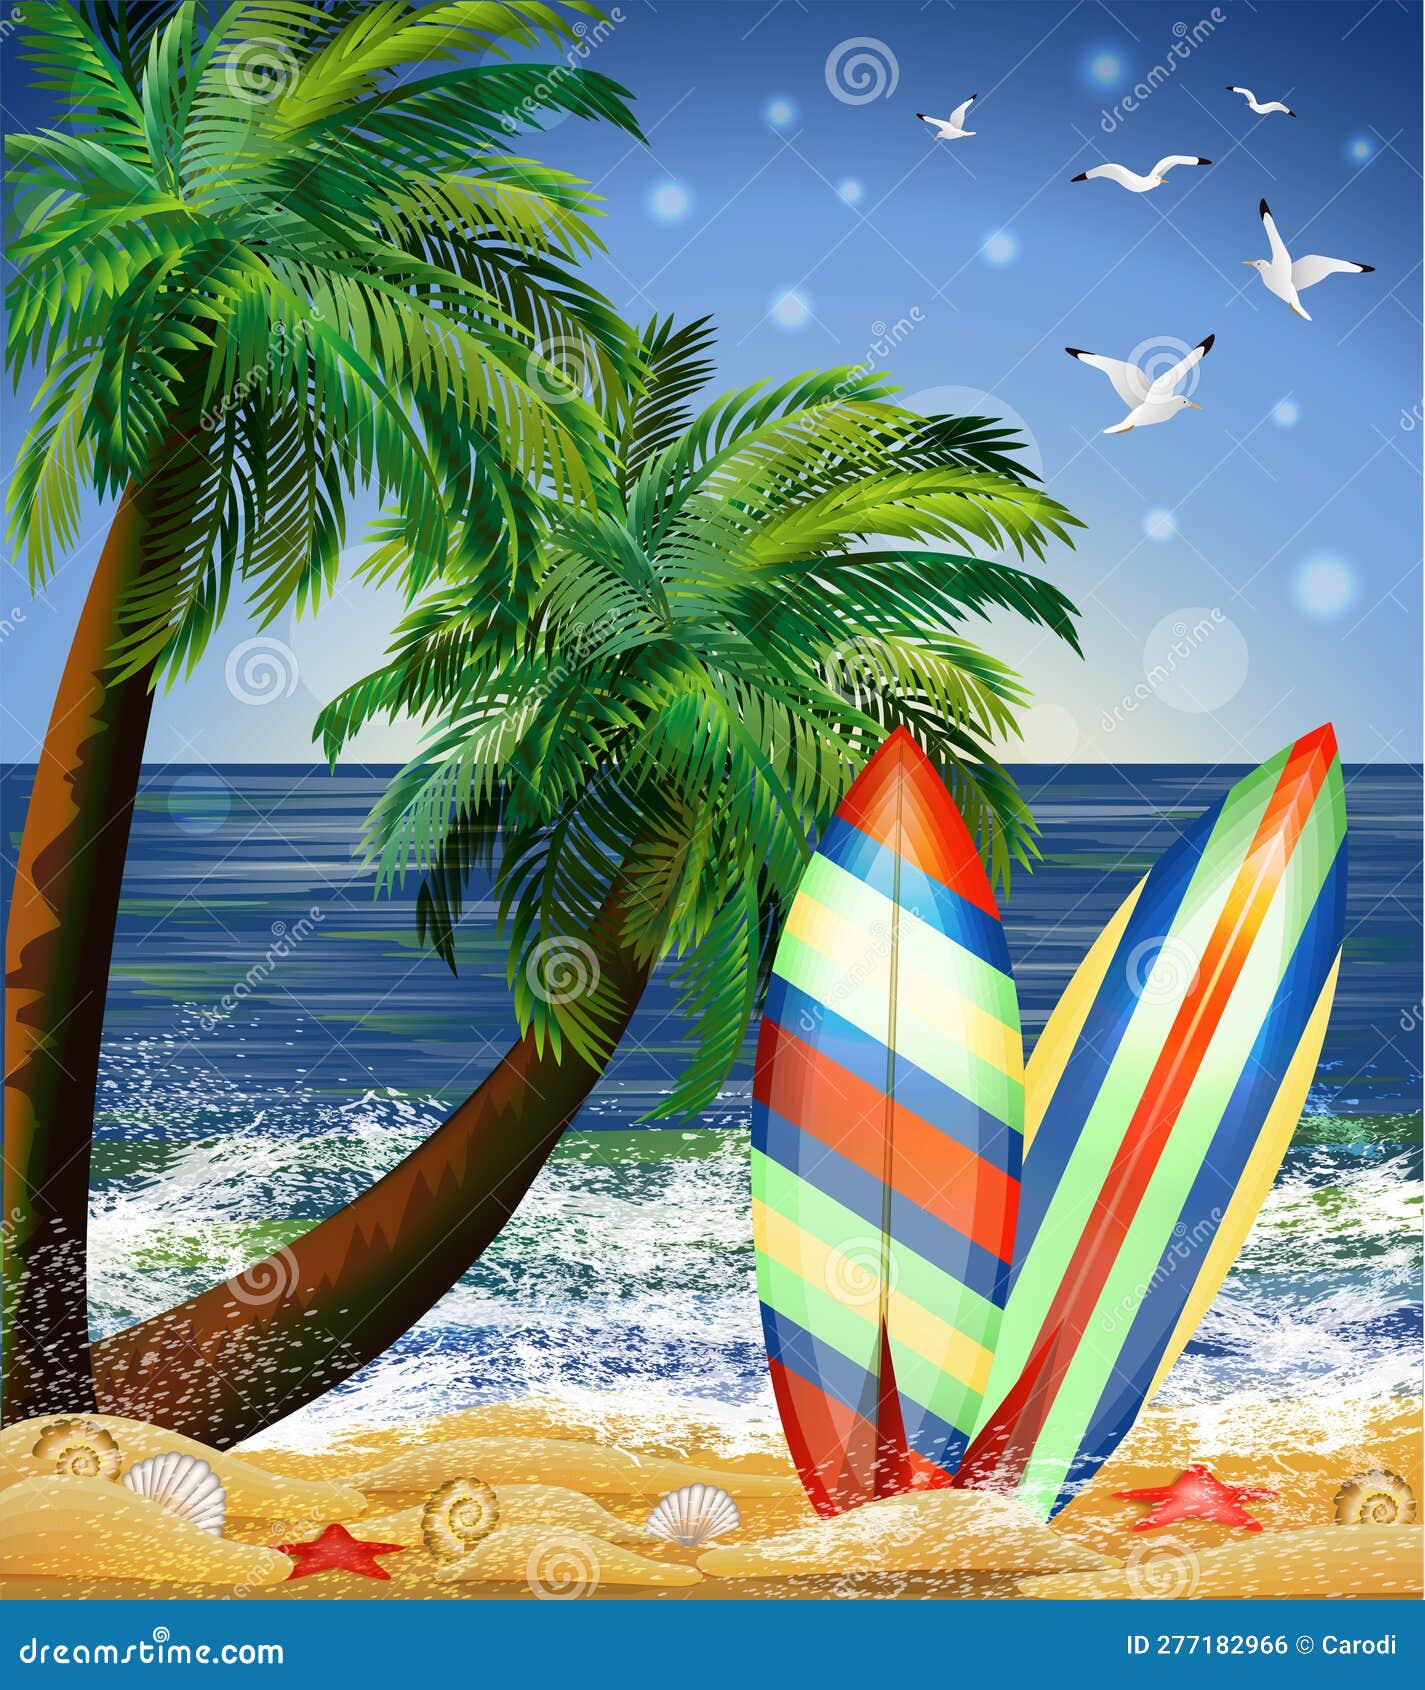 summer beach party card with serf boards